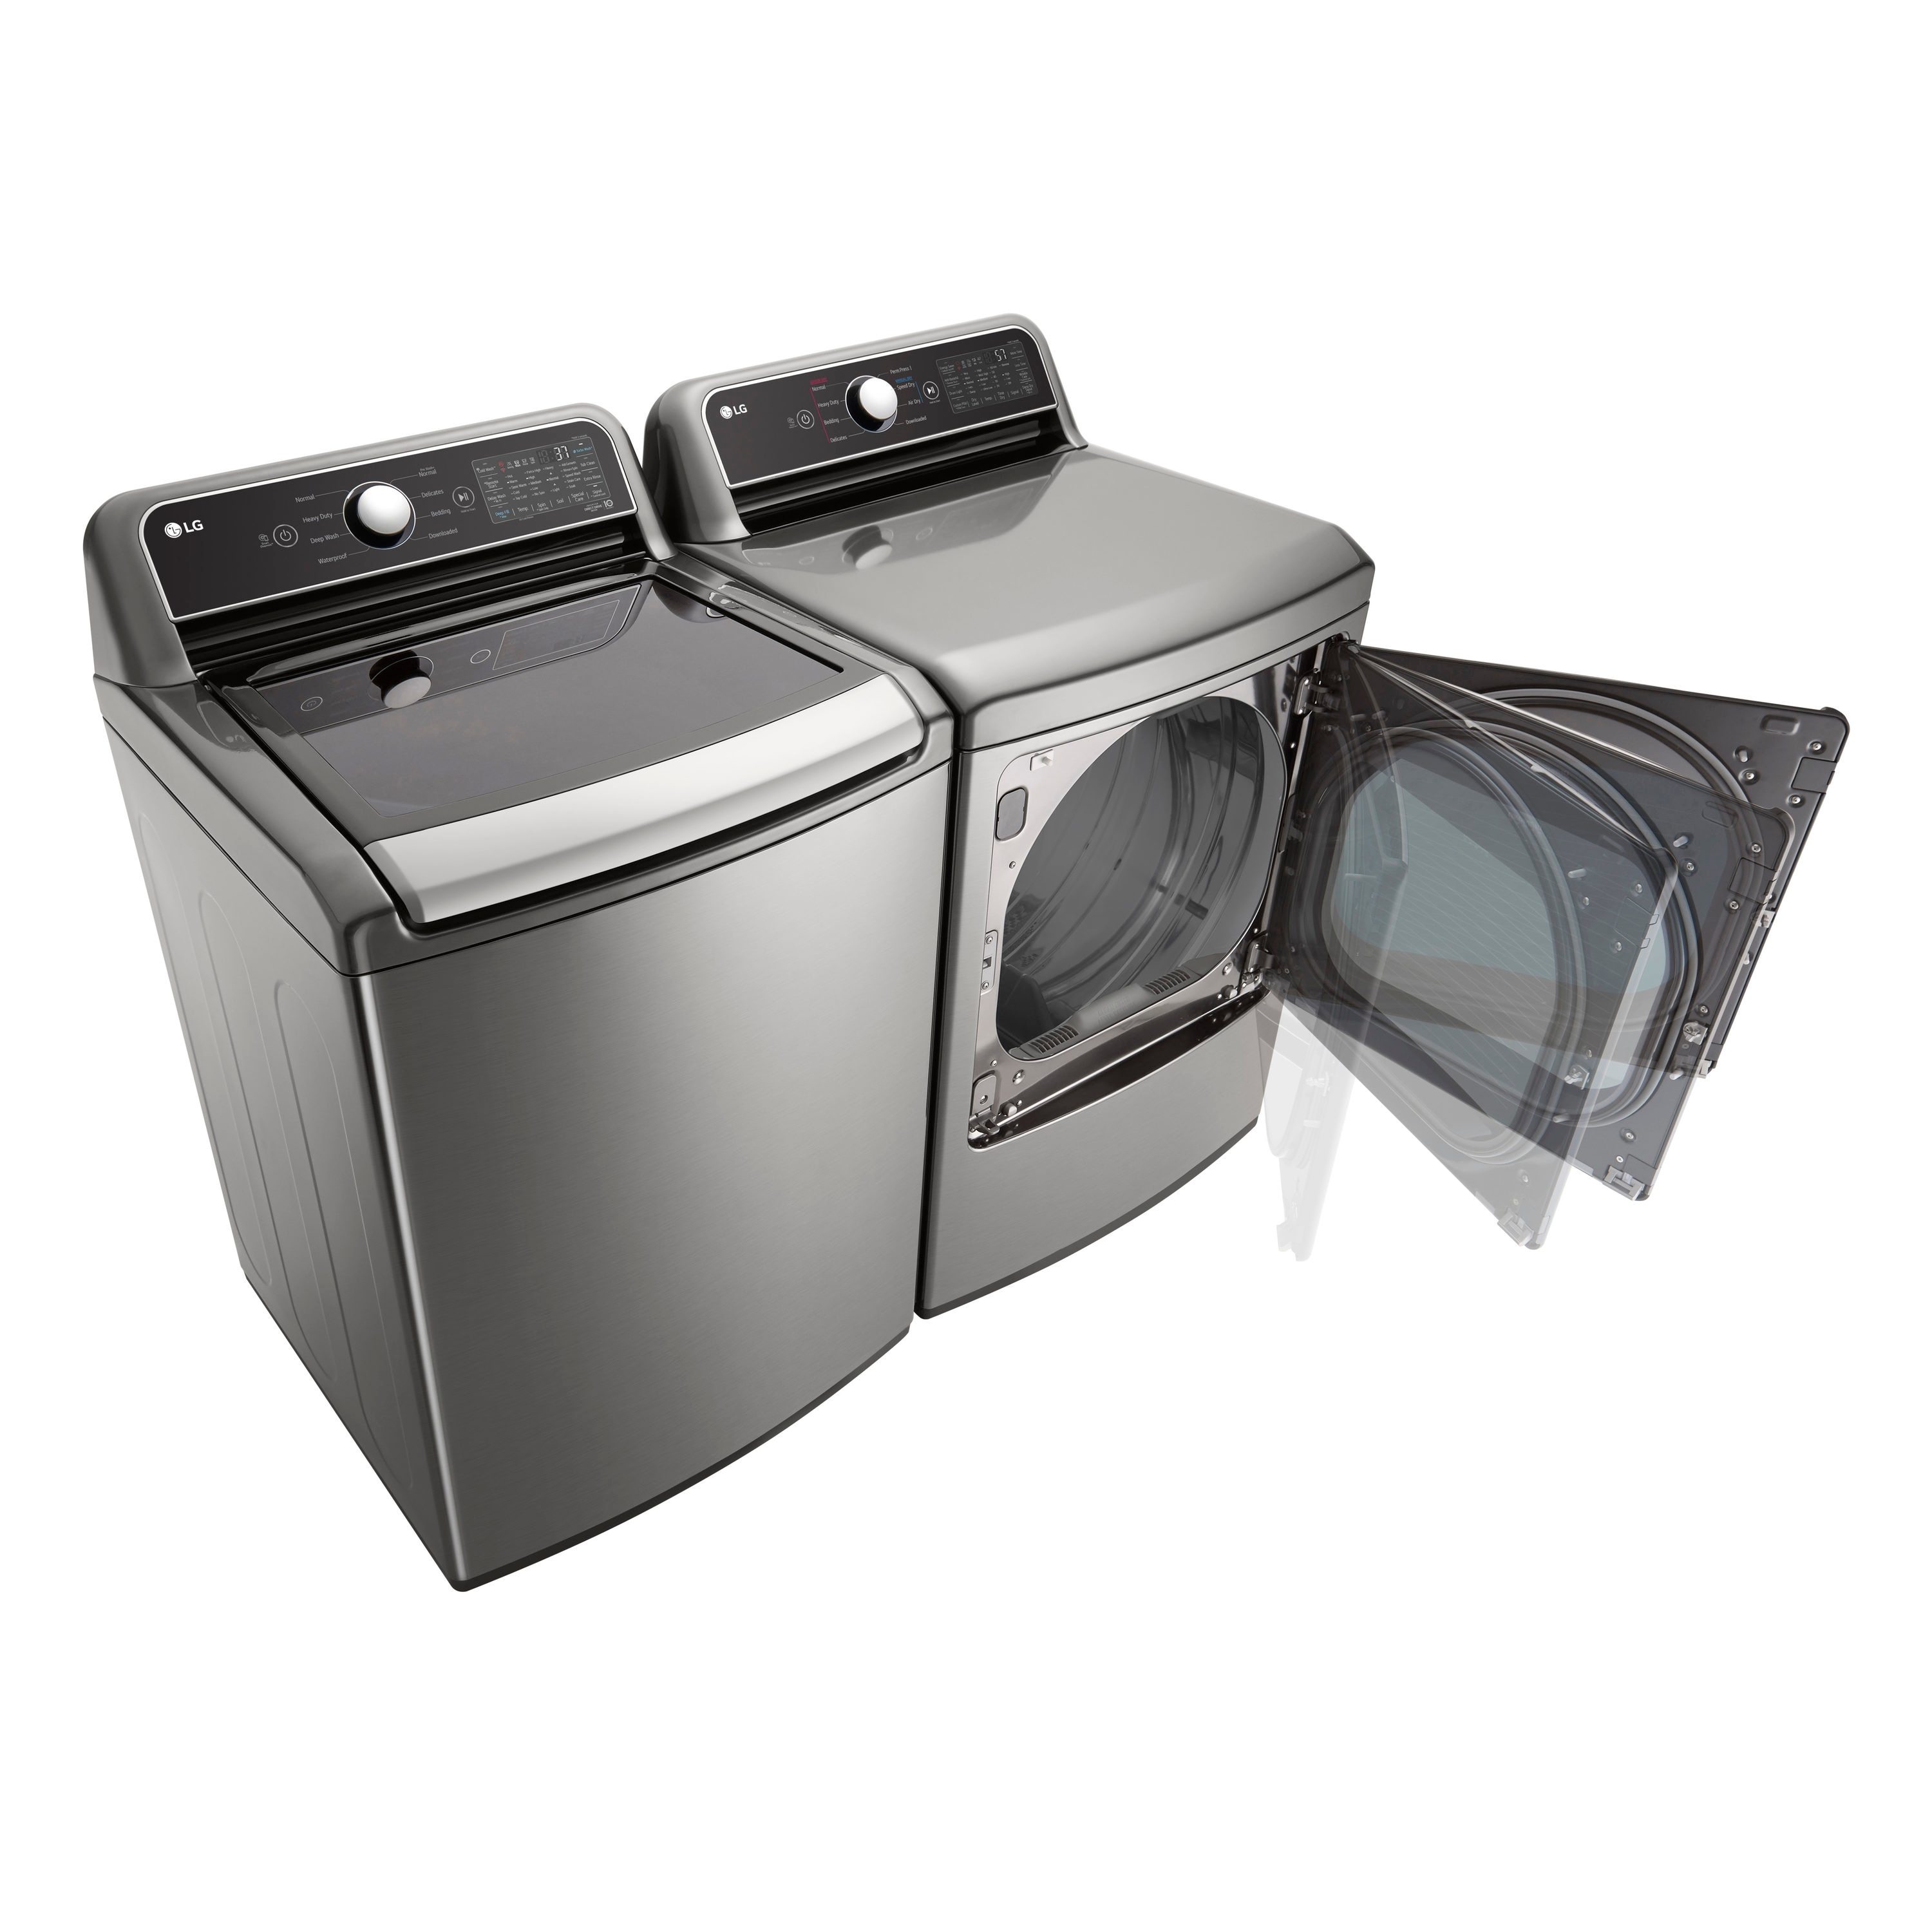 WT7405CW by LG - 5.3 cu.ft. Mega Capacity Smart wi-fi Enabled Top Load  Washer with 4-Way™ Agitator & TurboWash3D™ Technology